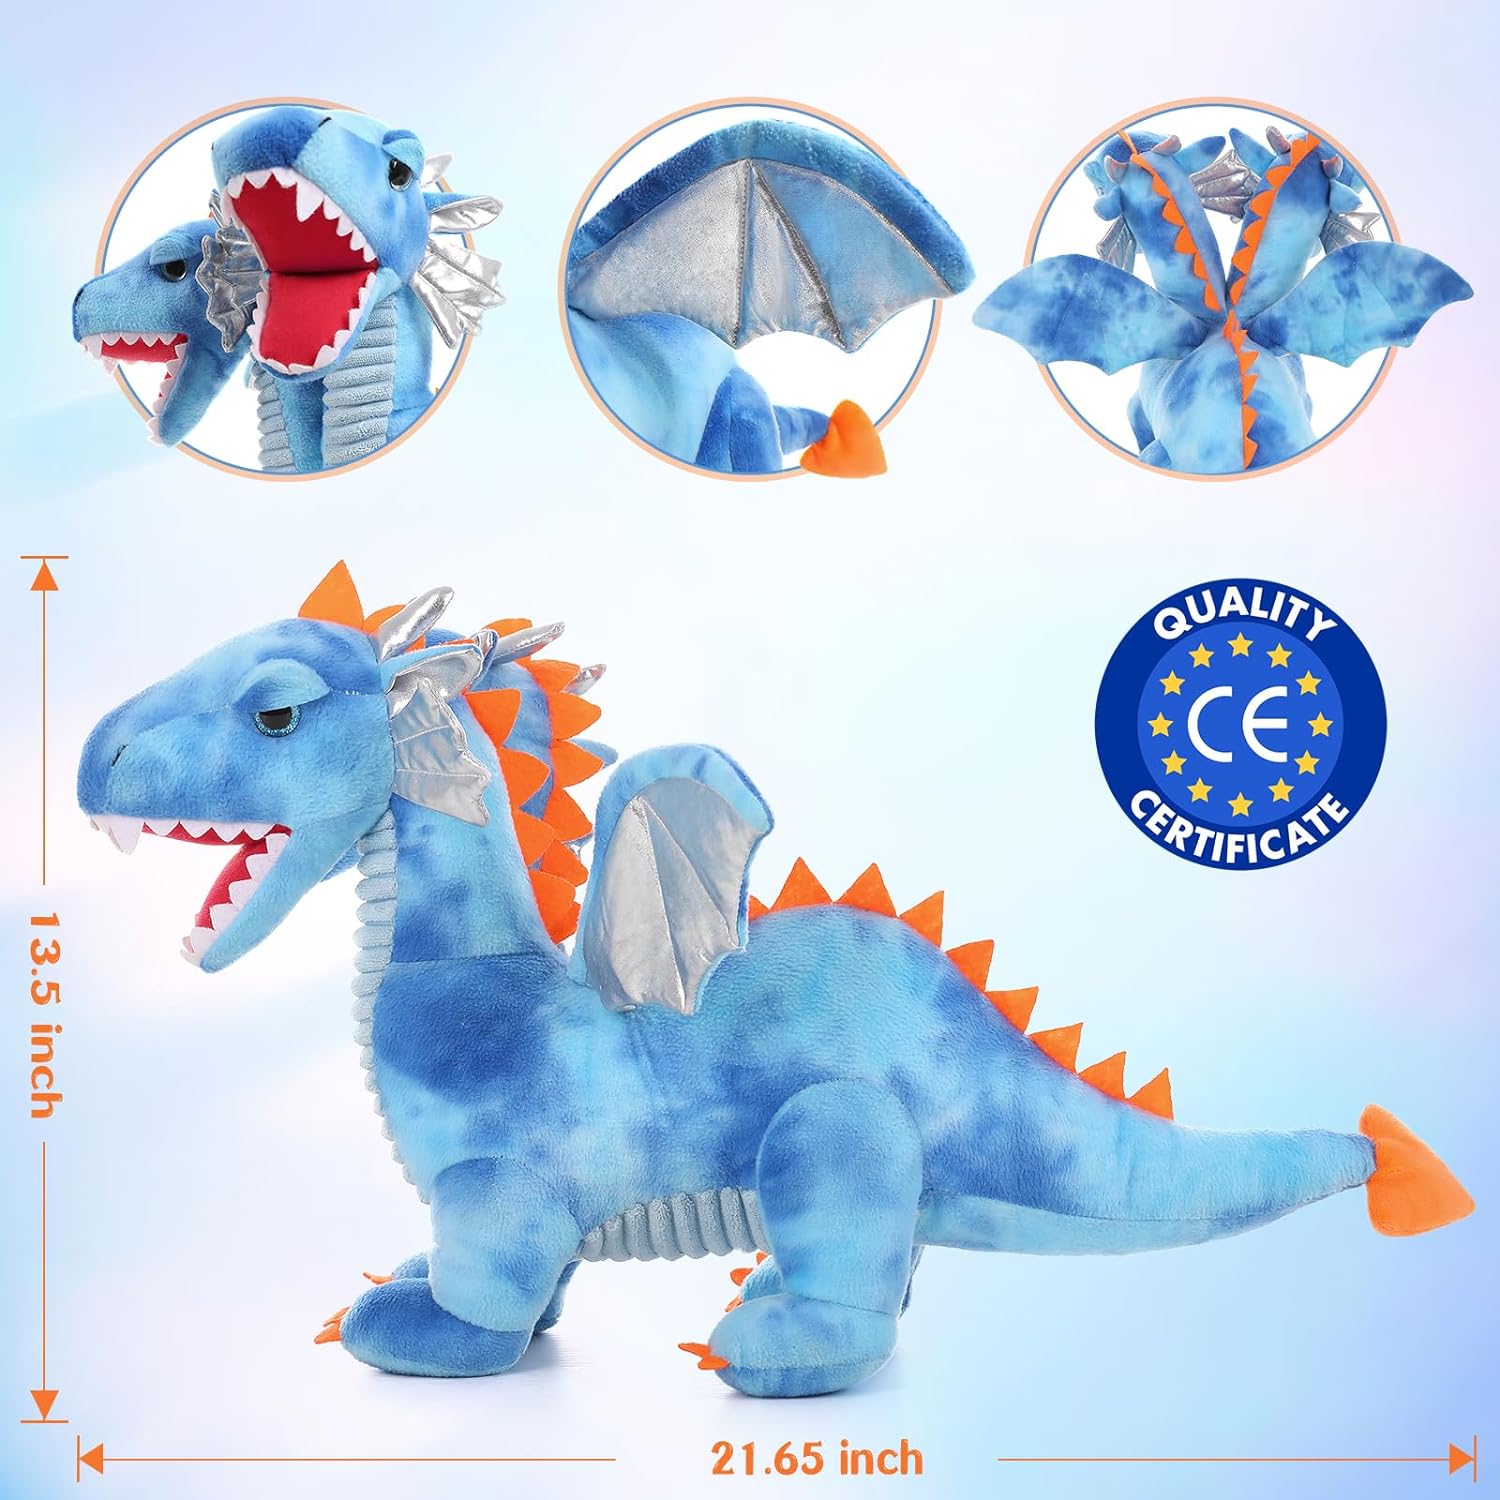 Double-headed Dragon Plush Toy, 23.6 Inches